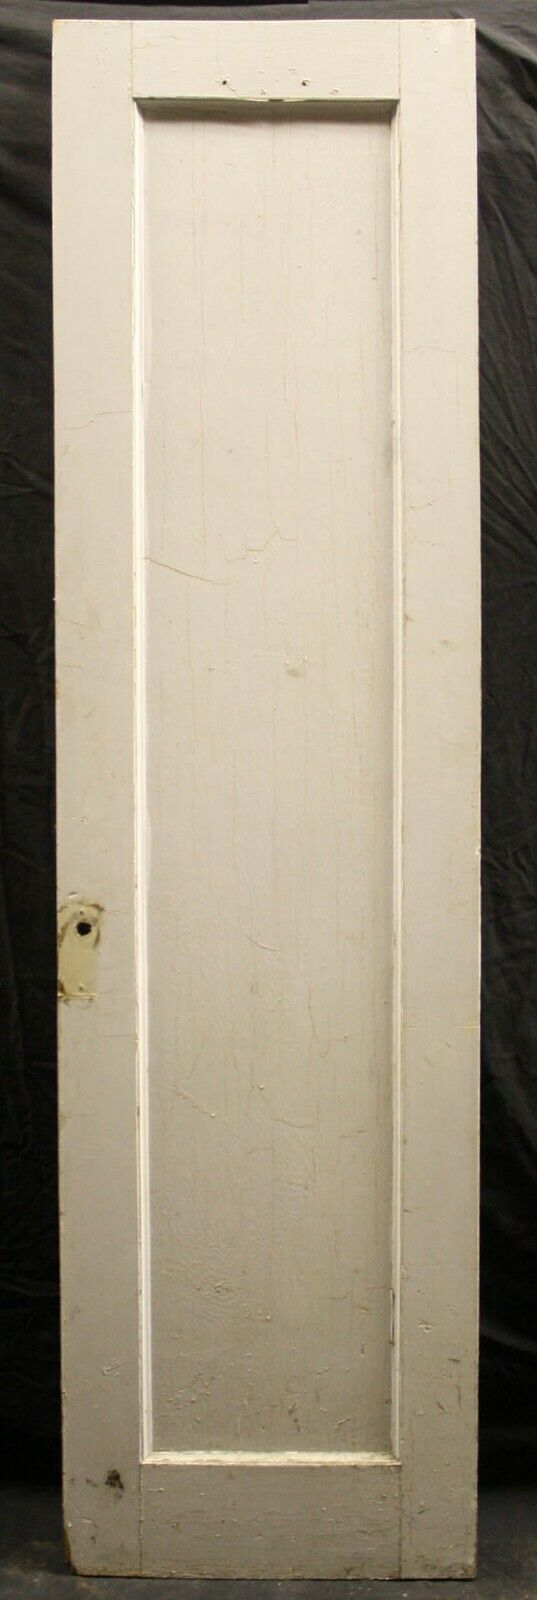 20"x78.5" Antique Vintage Old Reclaimed Salvaged SOLID Wood Wooden Interior Closet Pantry Door Panel